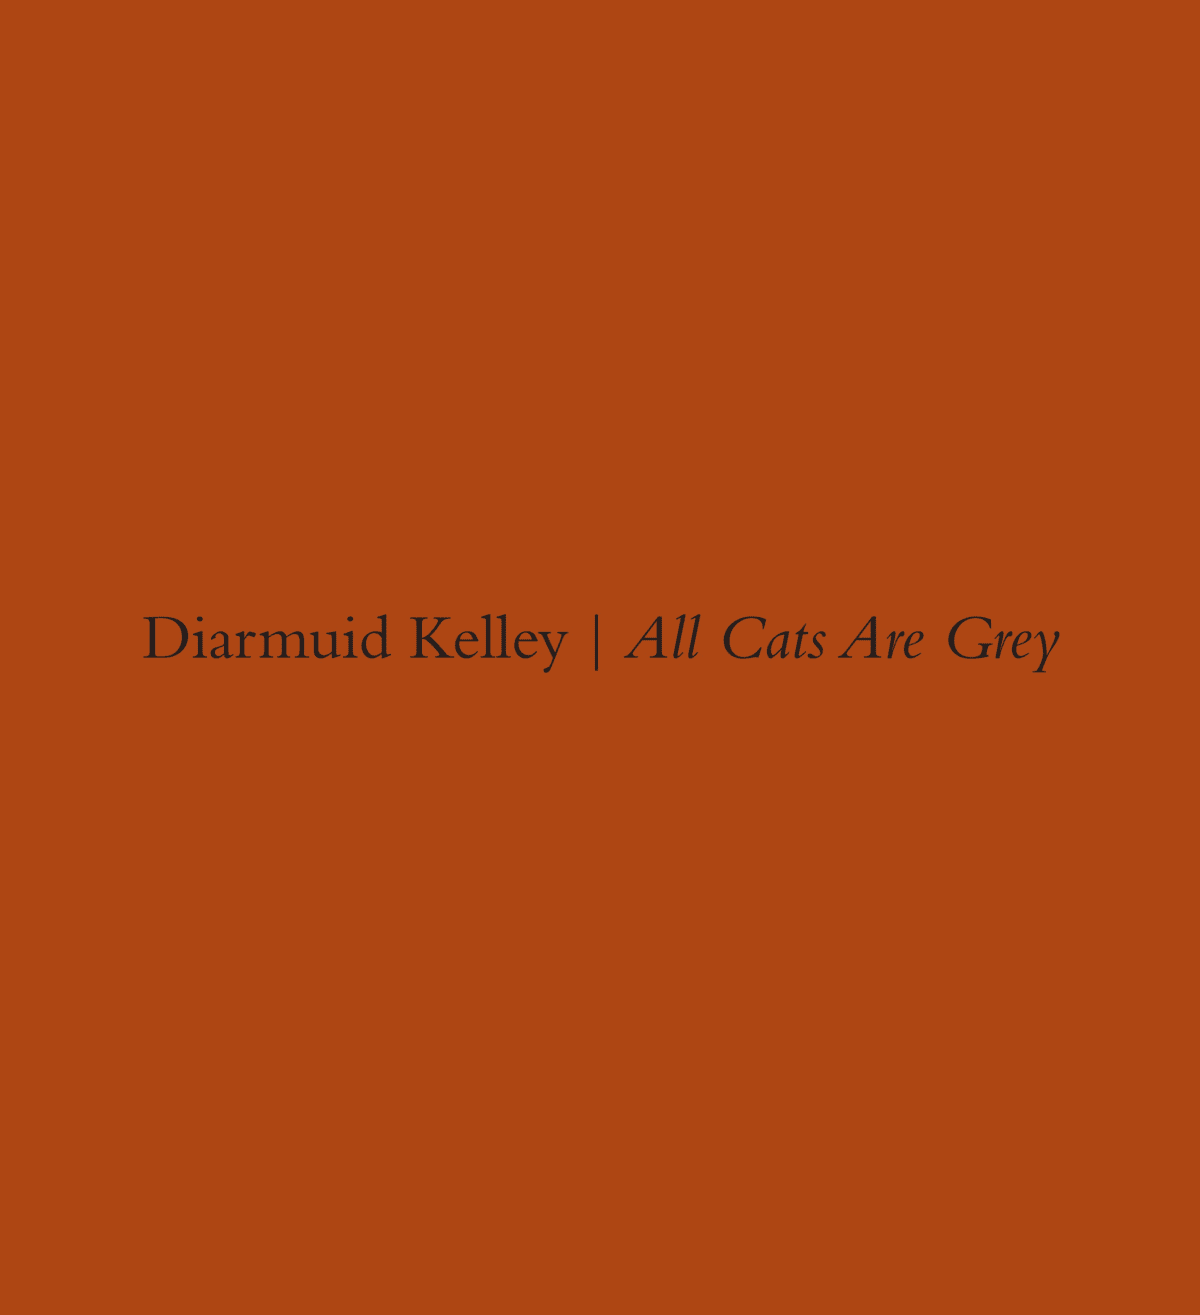 Diarmuid Kelley: All Cats Are Grey . Selected Works 2011-2013